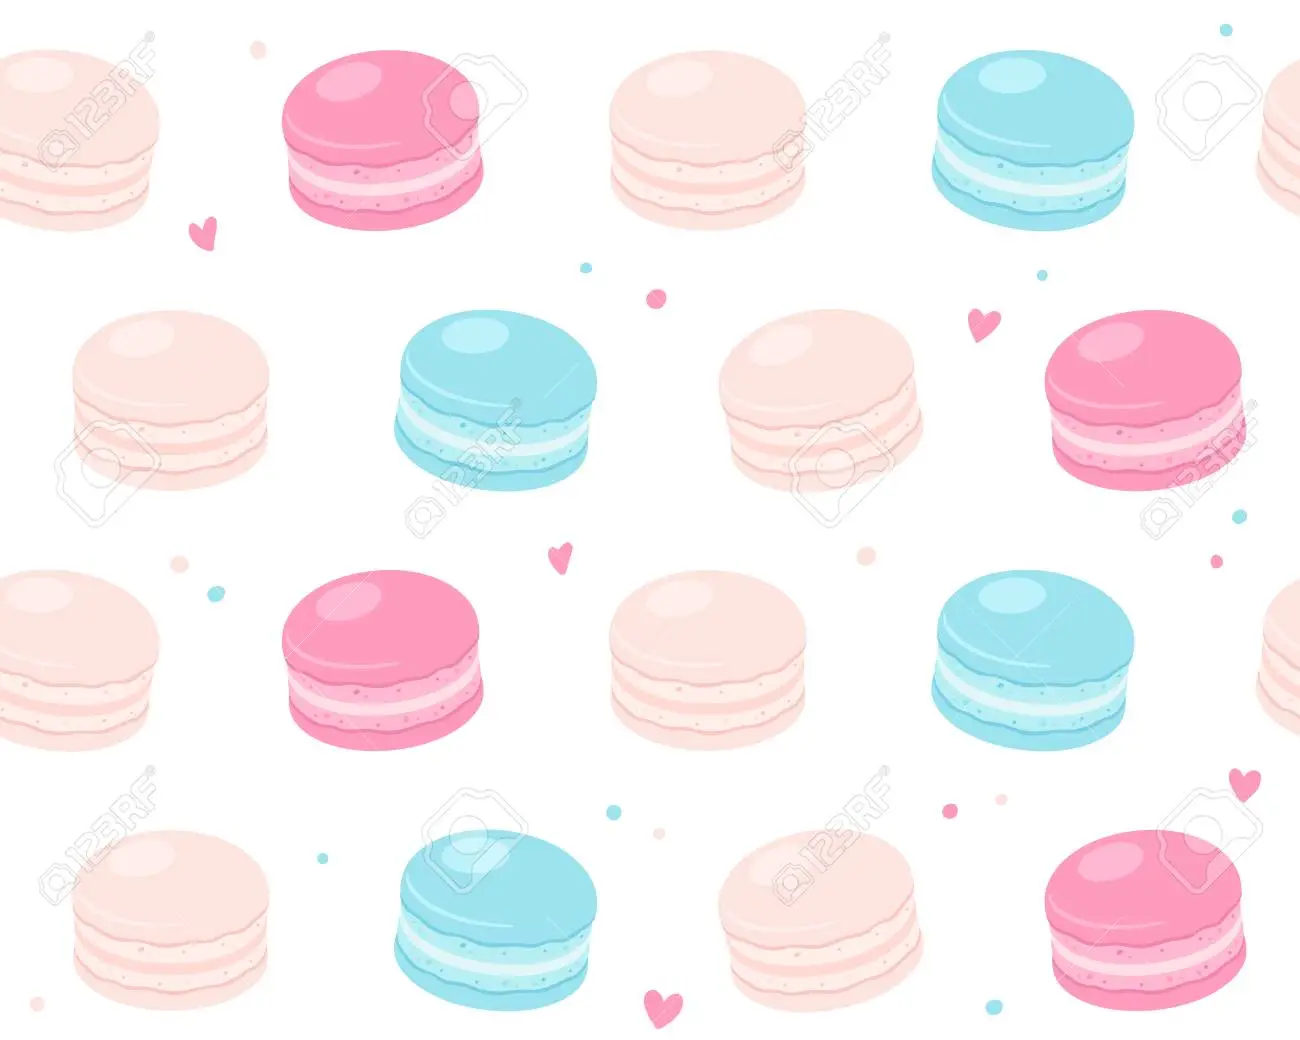 Cute pastel macarons pattern traditional french almond cookies seamless background texture royalty free svg cliparts vectors and stock illustration image